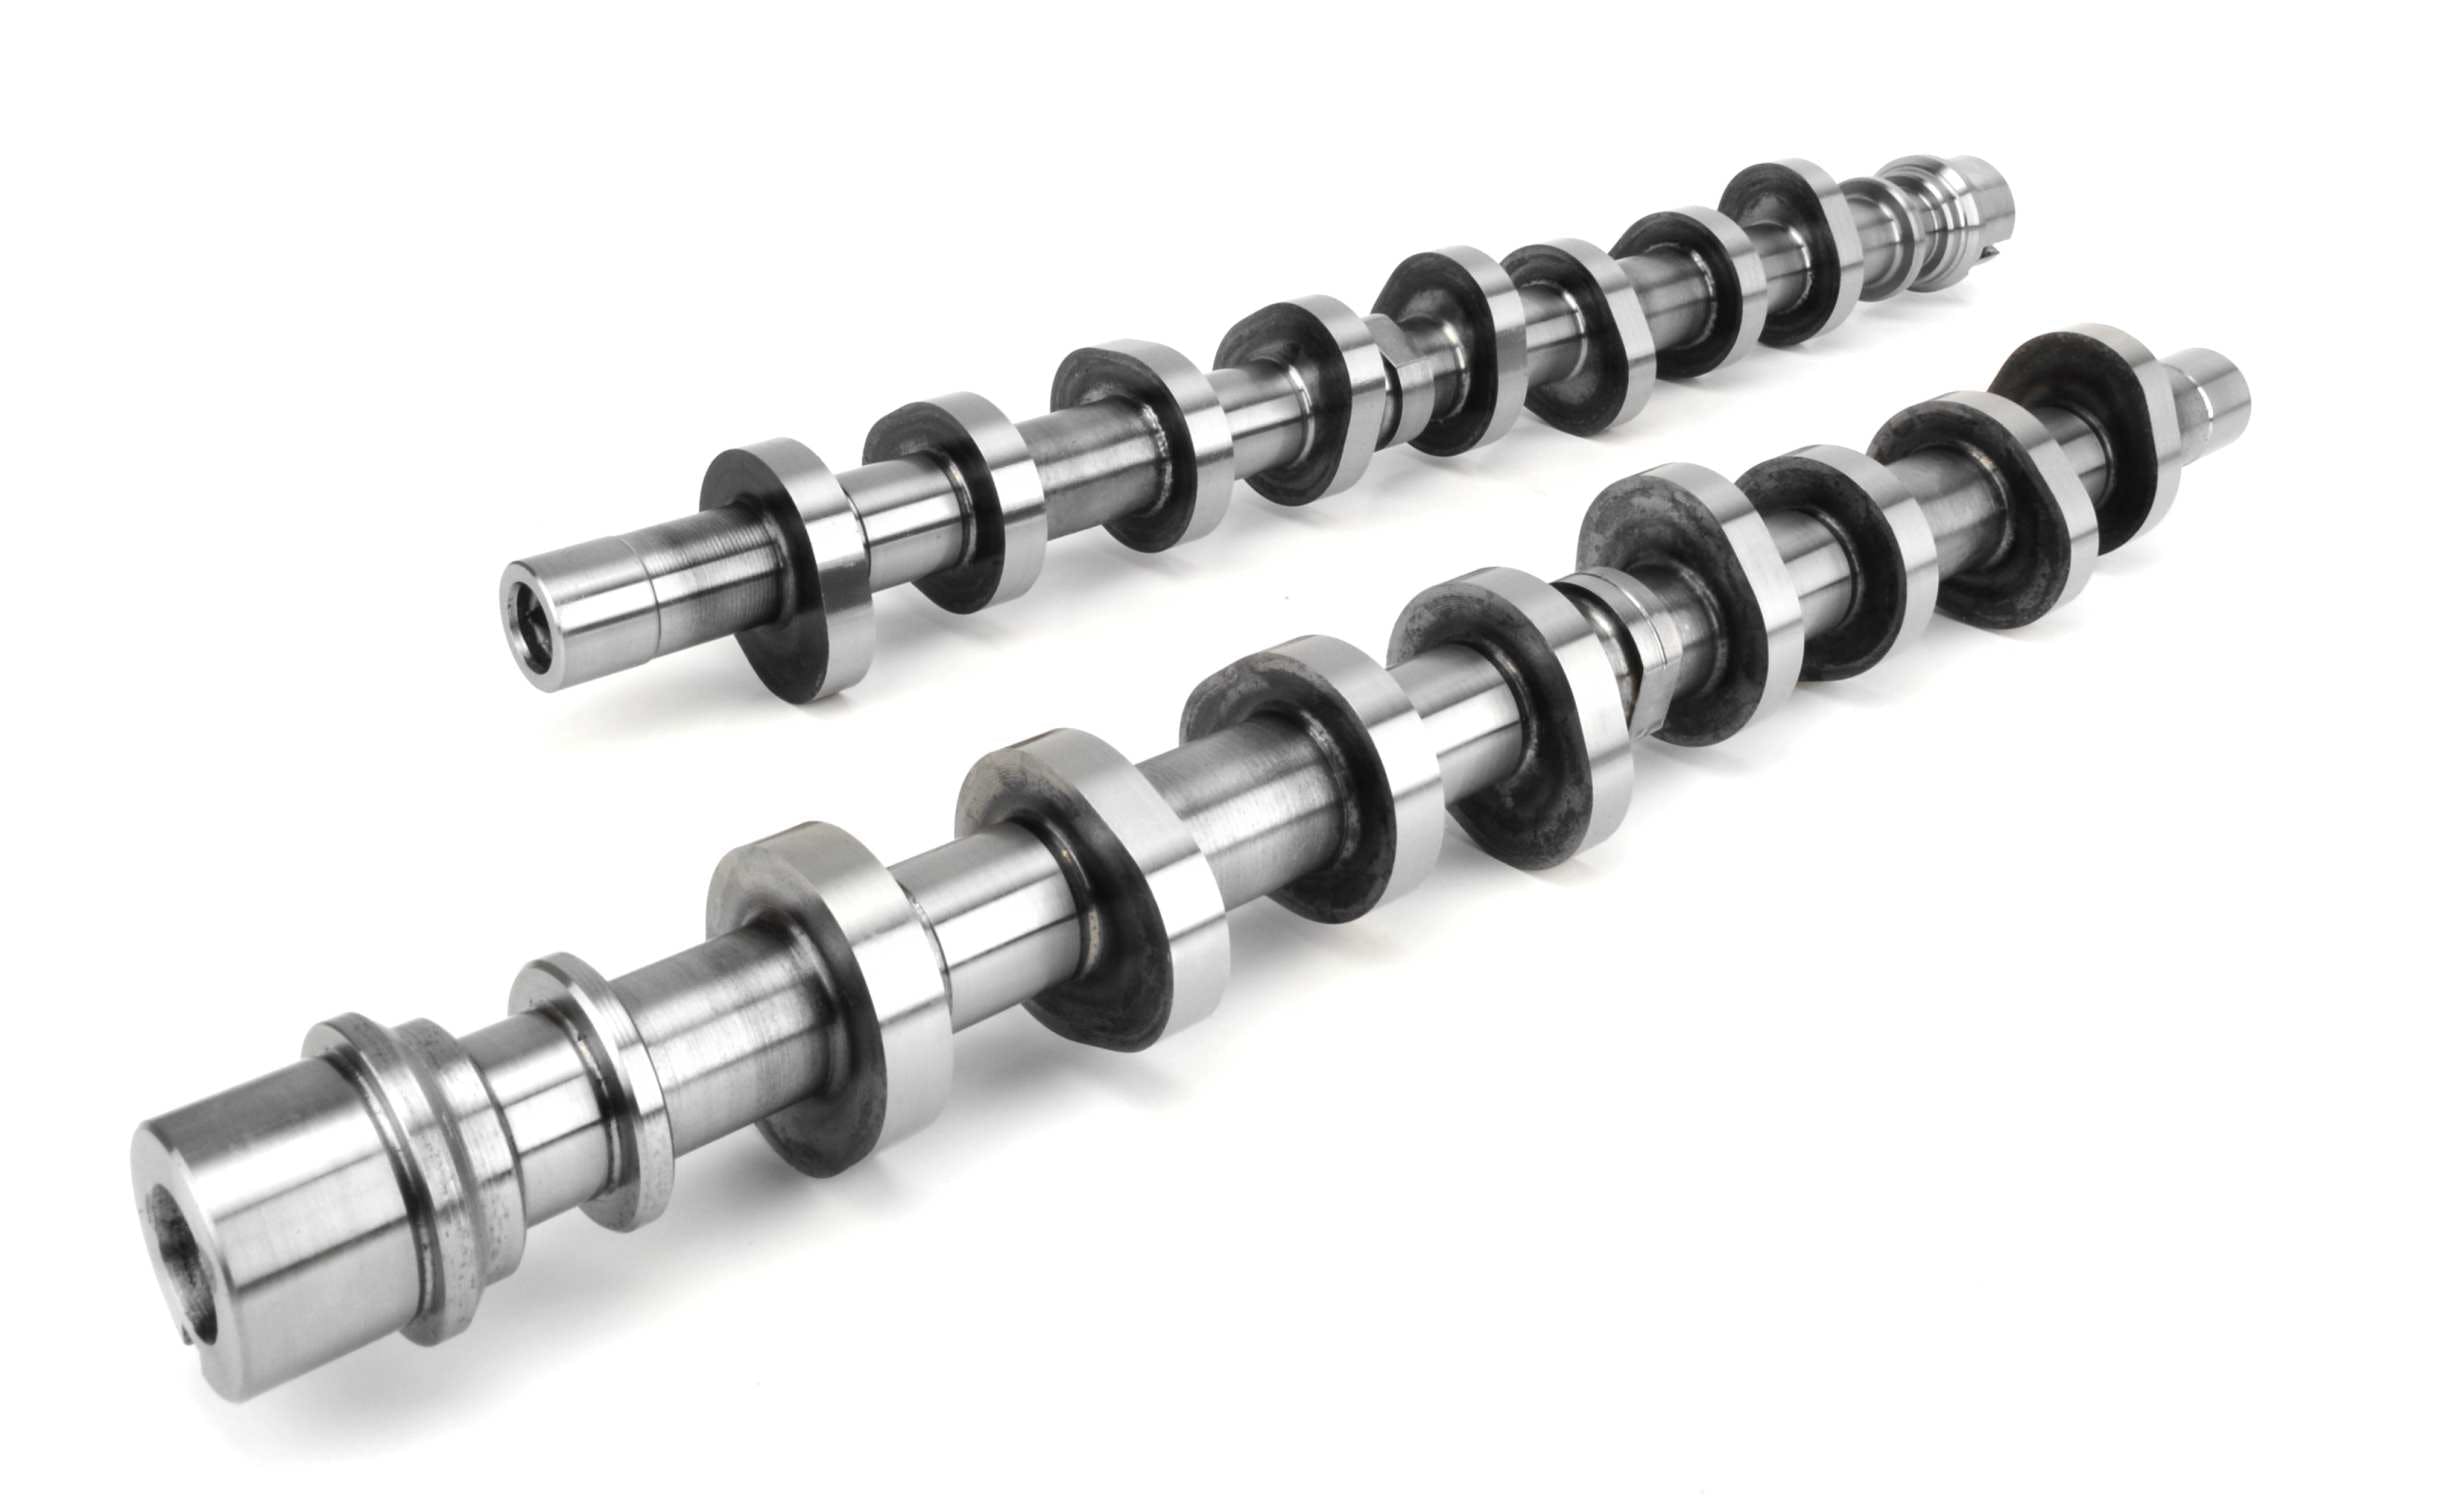 Competition Cams 102700 Xtreme Energy Camshaft